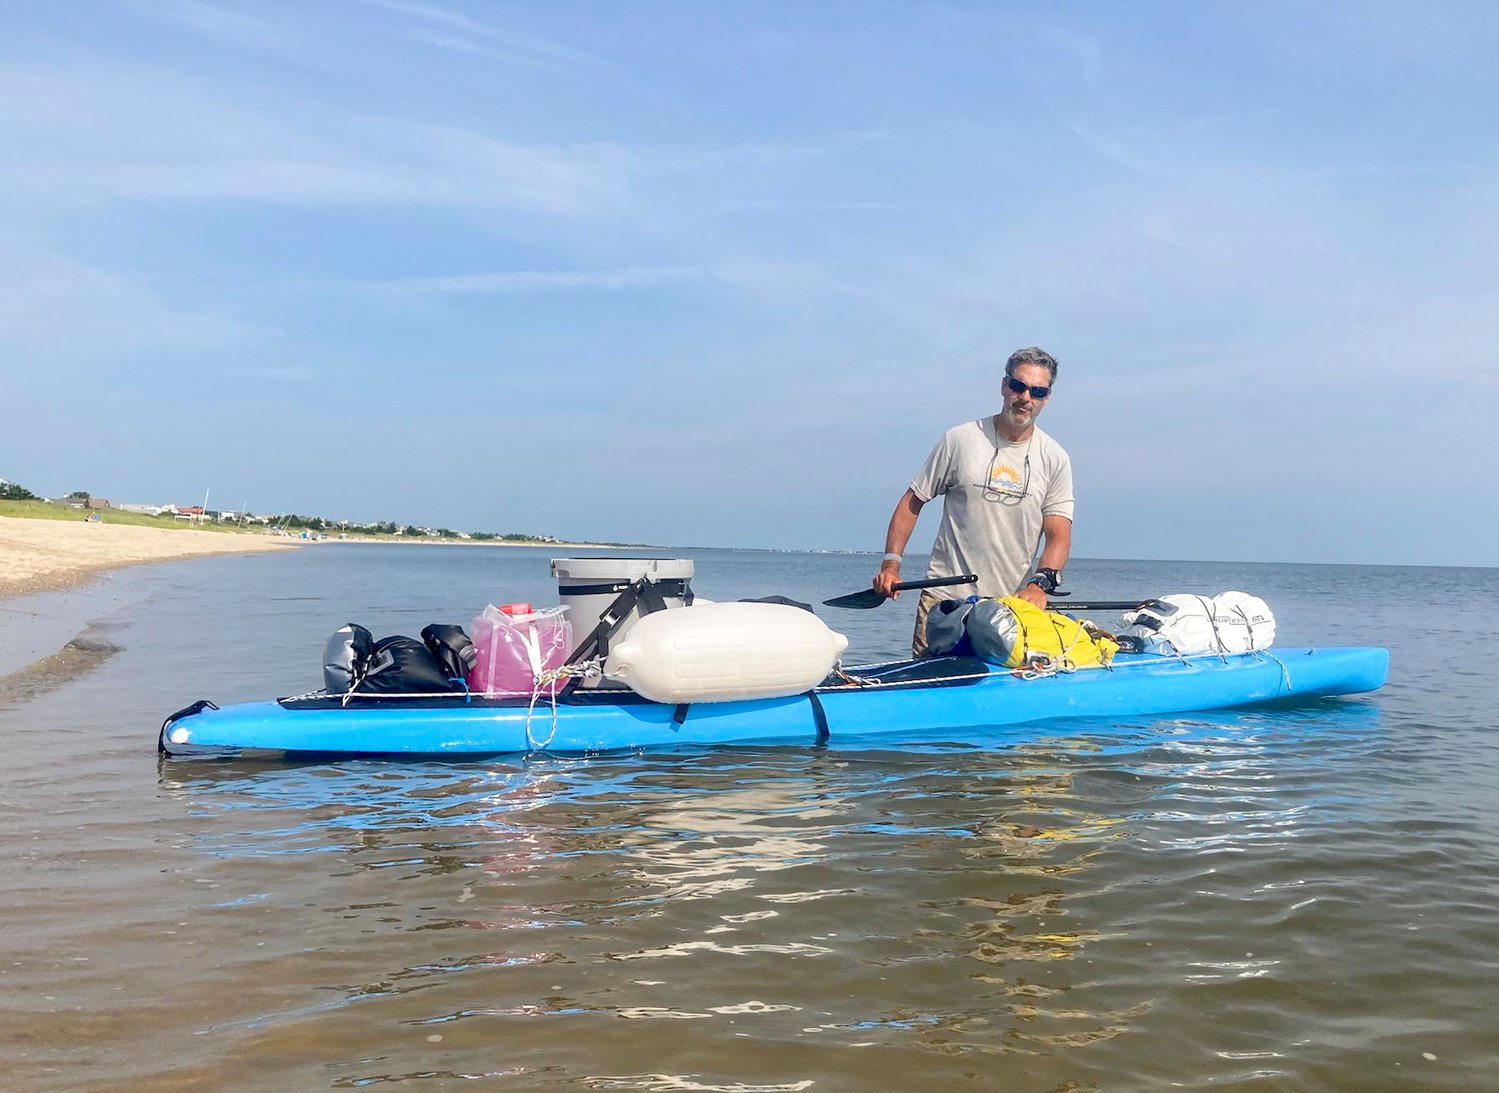 Adam Nagler preparing to set off from Rehoboth Beach, Del. Sunday on his 400-mile paddle-board journey to Nantucket.